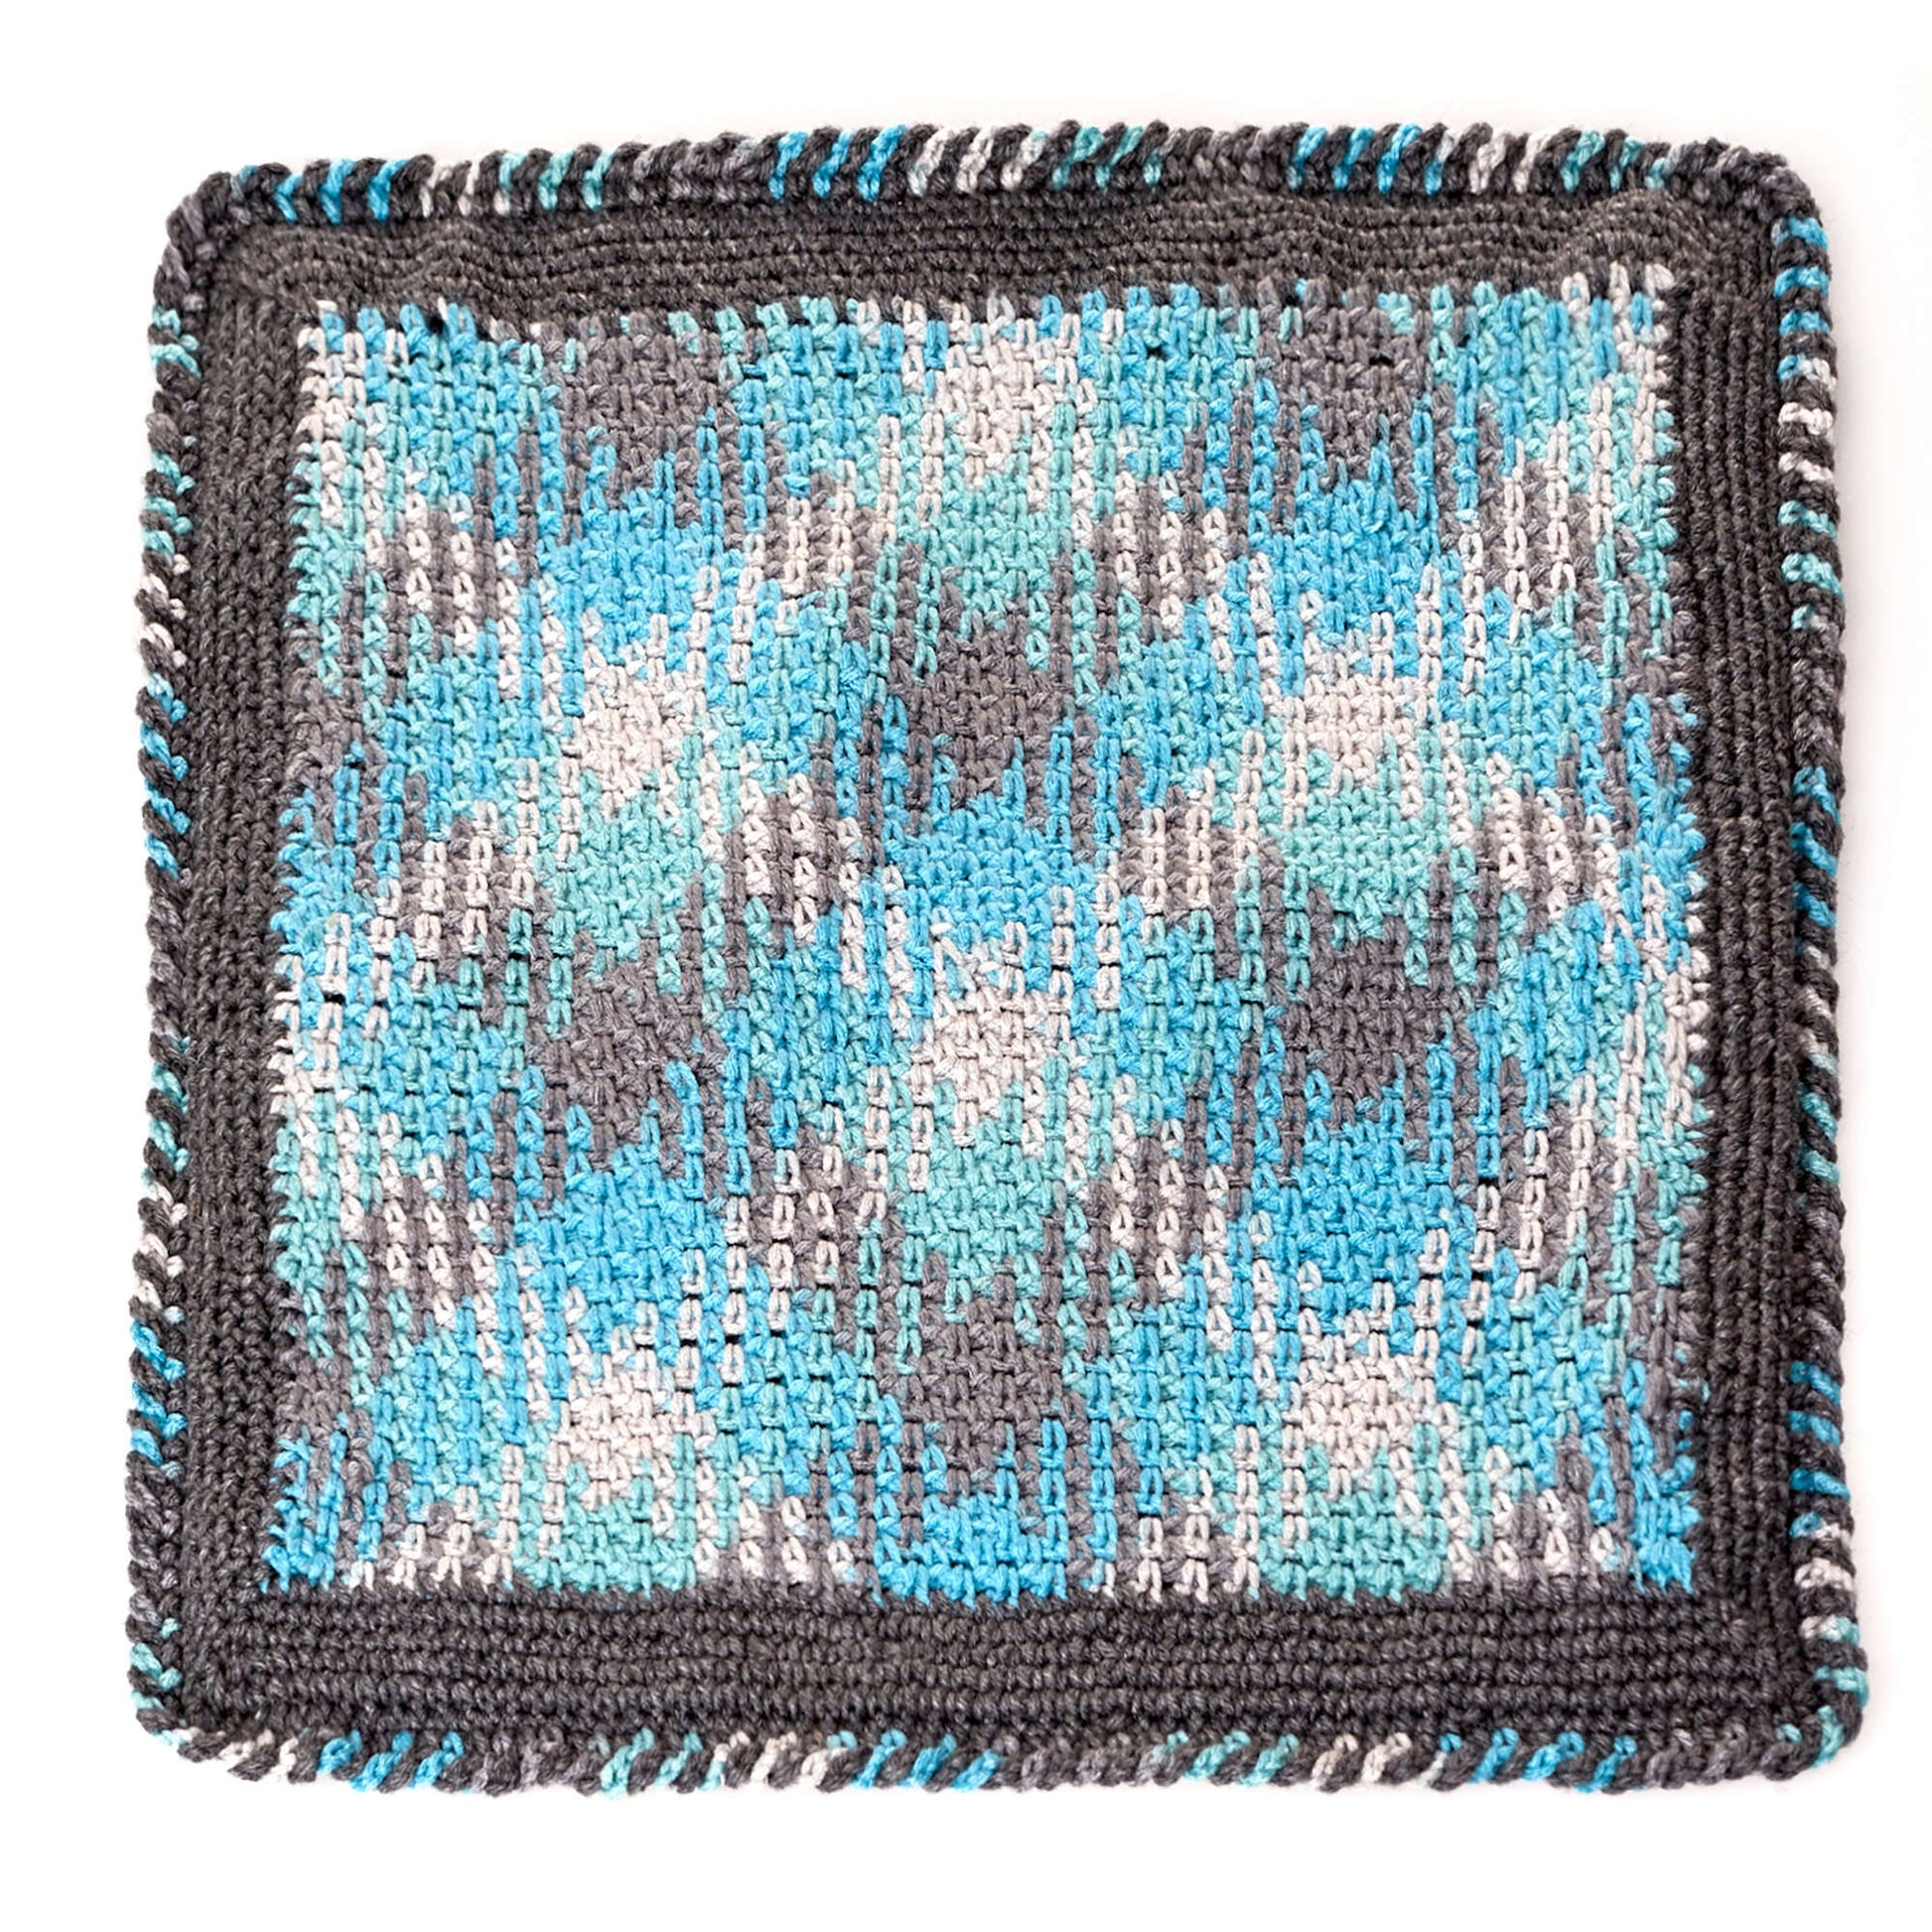 Free Red Heart Crochet Planned Pooling Argyle Pillow Pattern